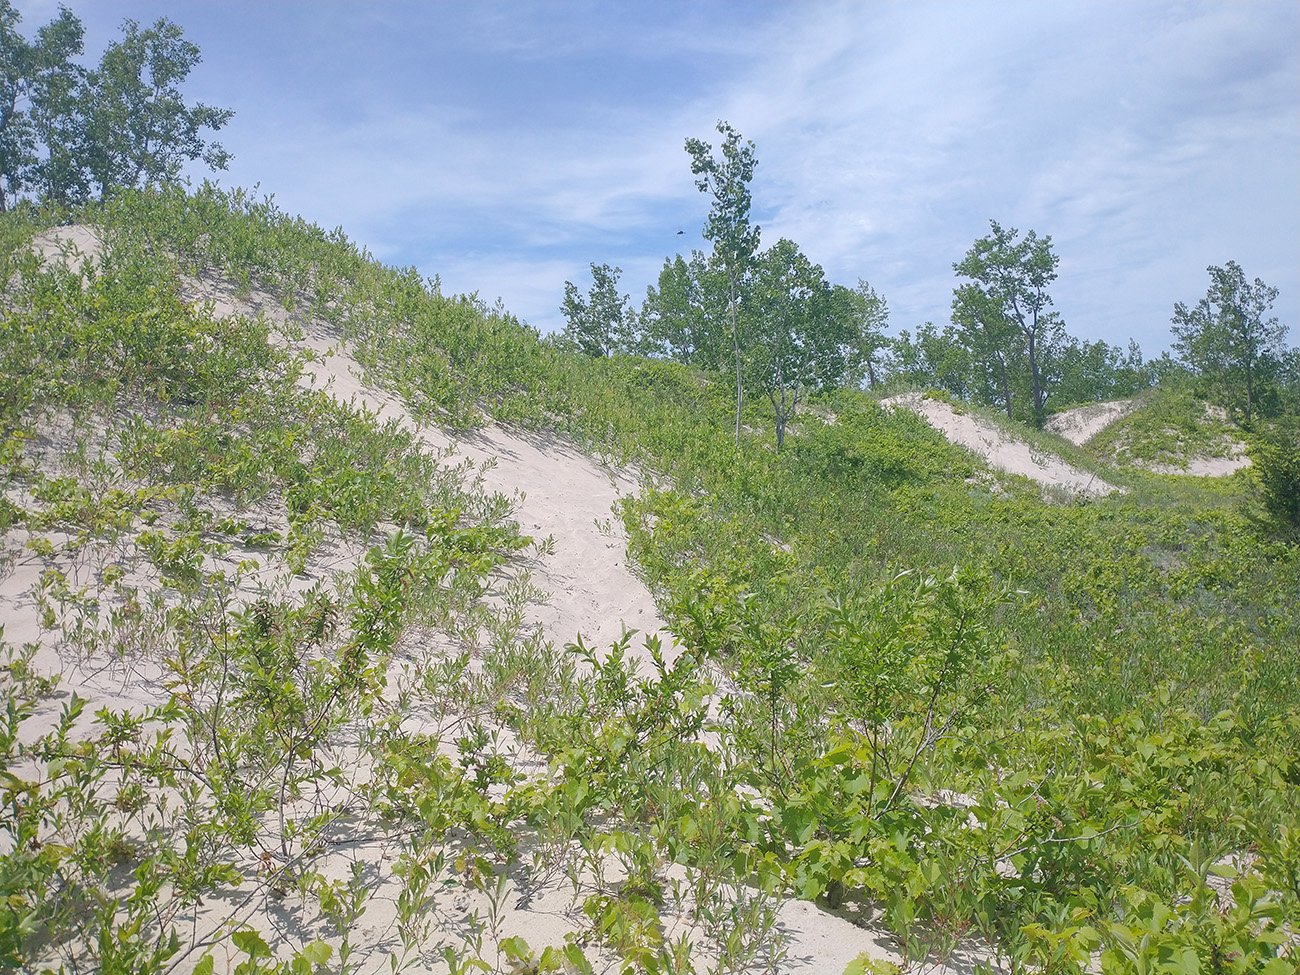 I mean. Dunes with plants growing on them? 2/10 sorry. Where's the restauration guy?